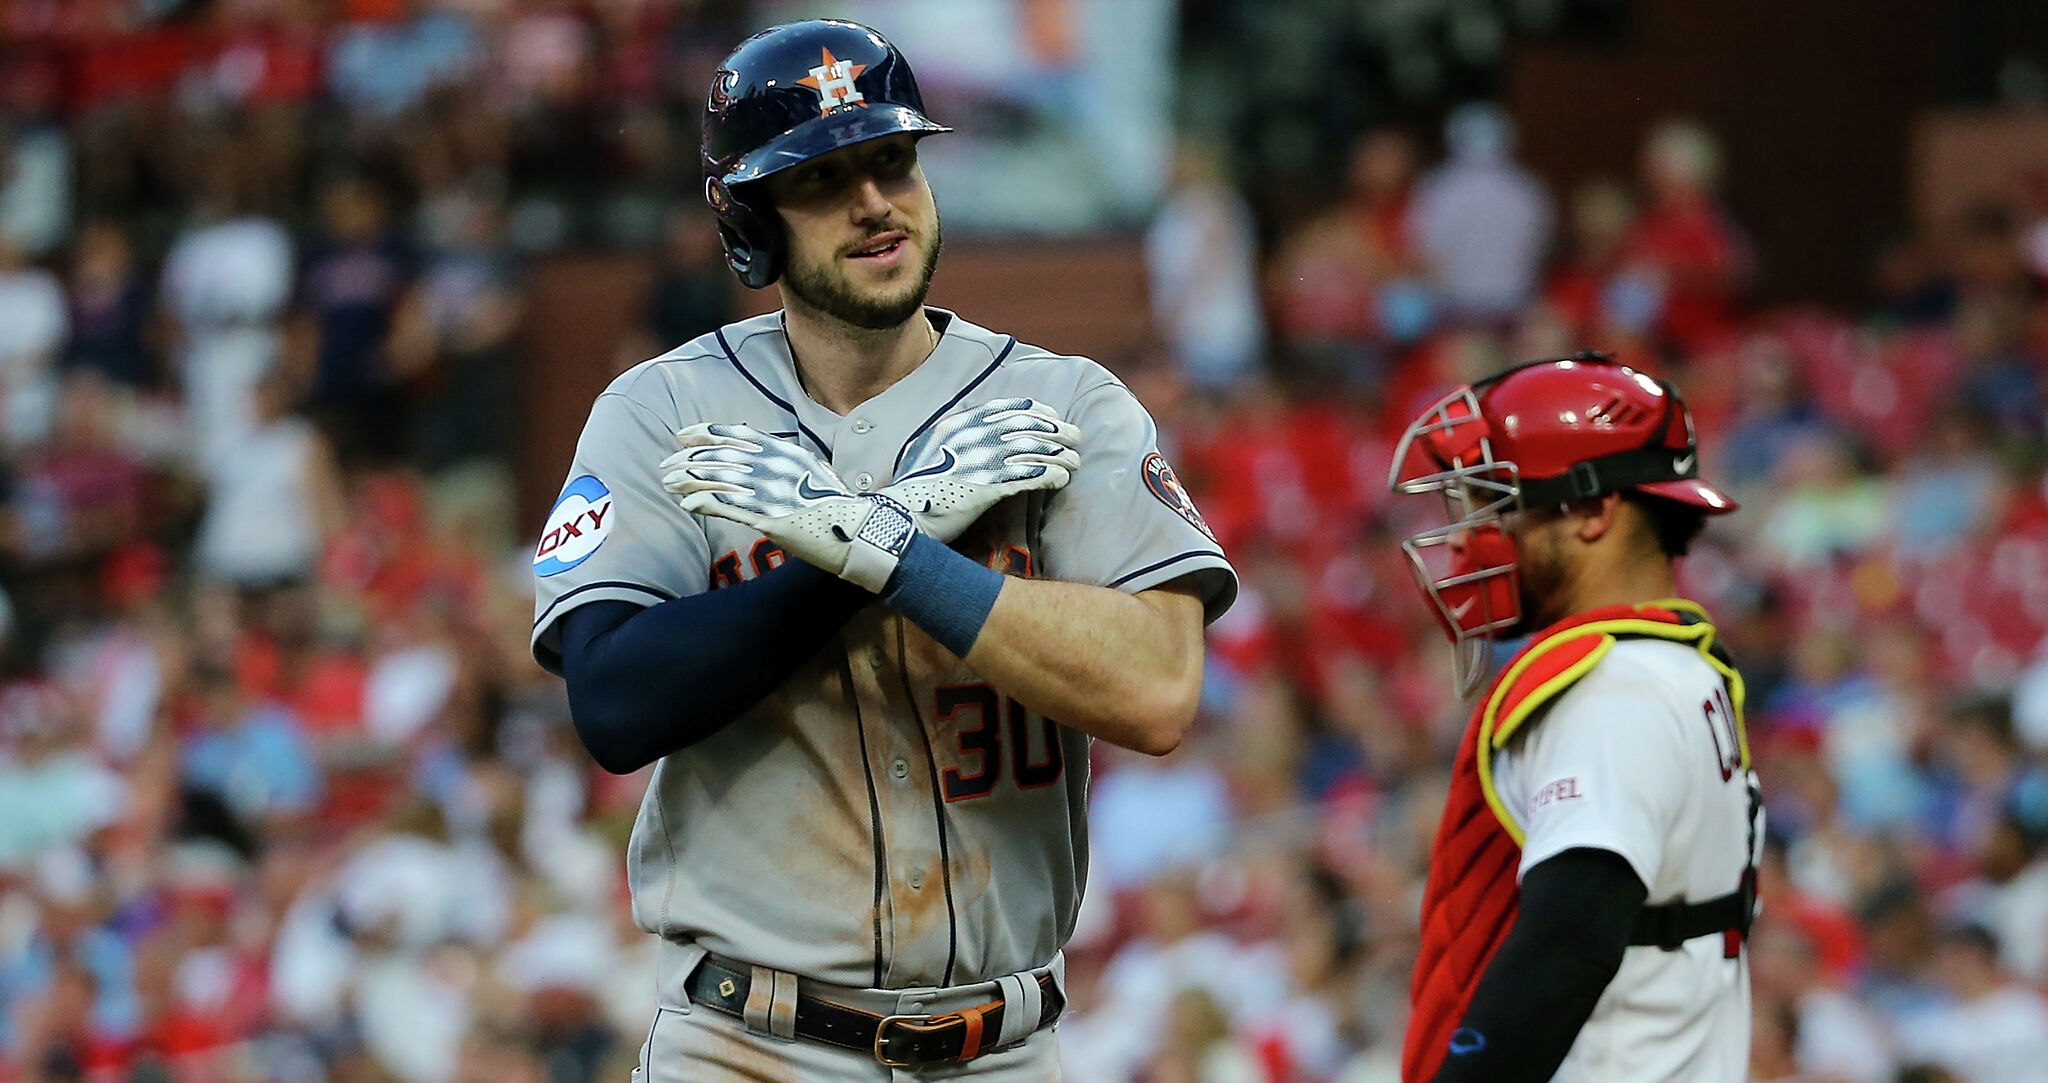 Kyle Tucker hits 3 HRs and drives in 4 runs as the Astros beat the